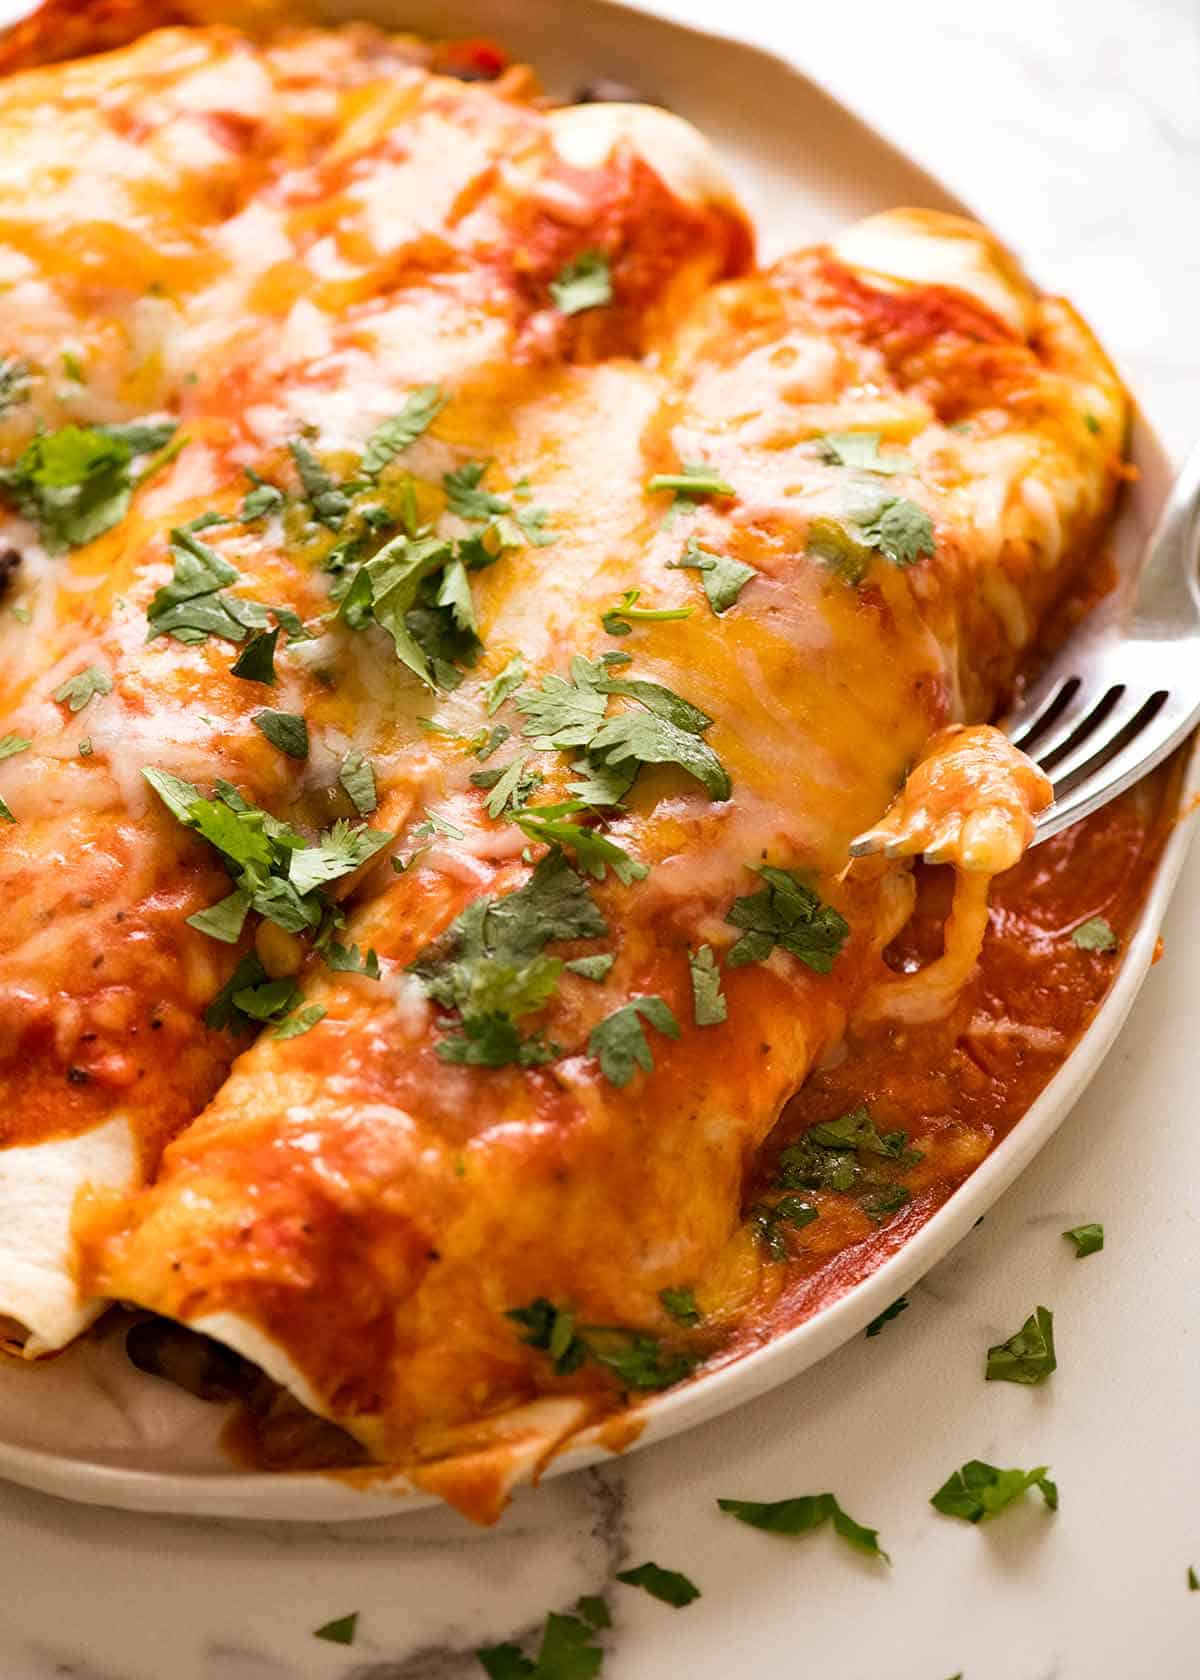 Plate of juicy Chicken Enchiladas, ready to be devoured